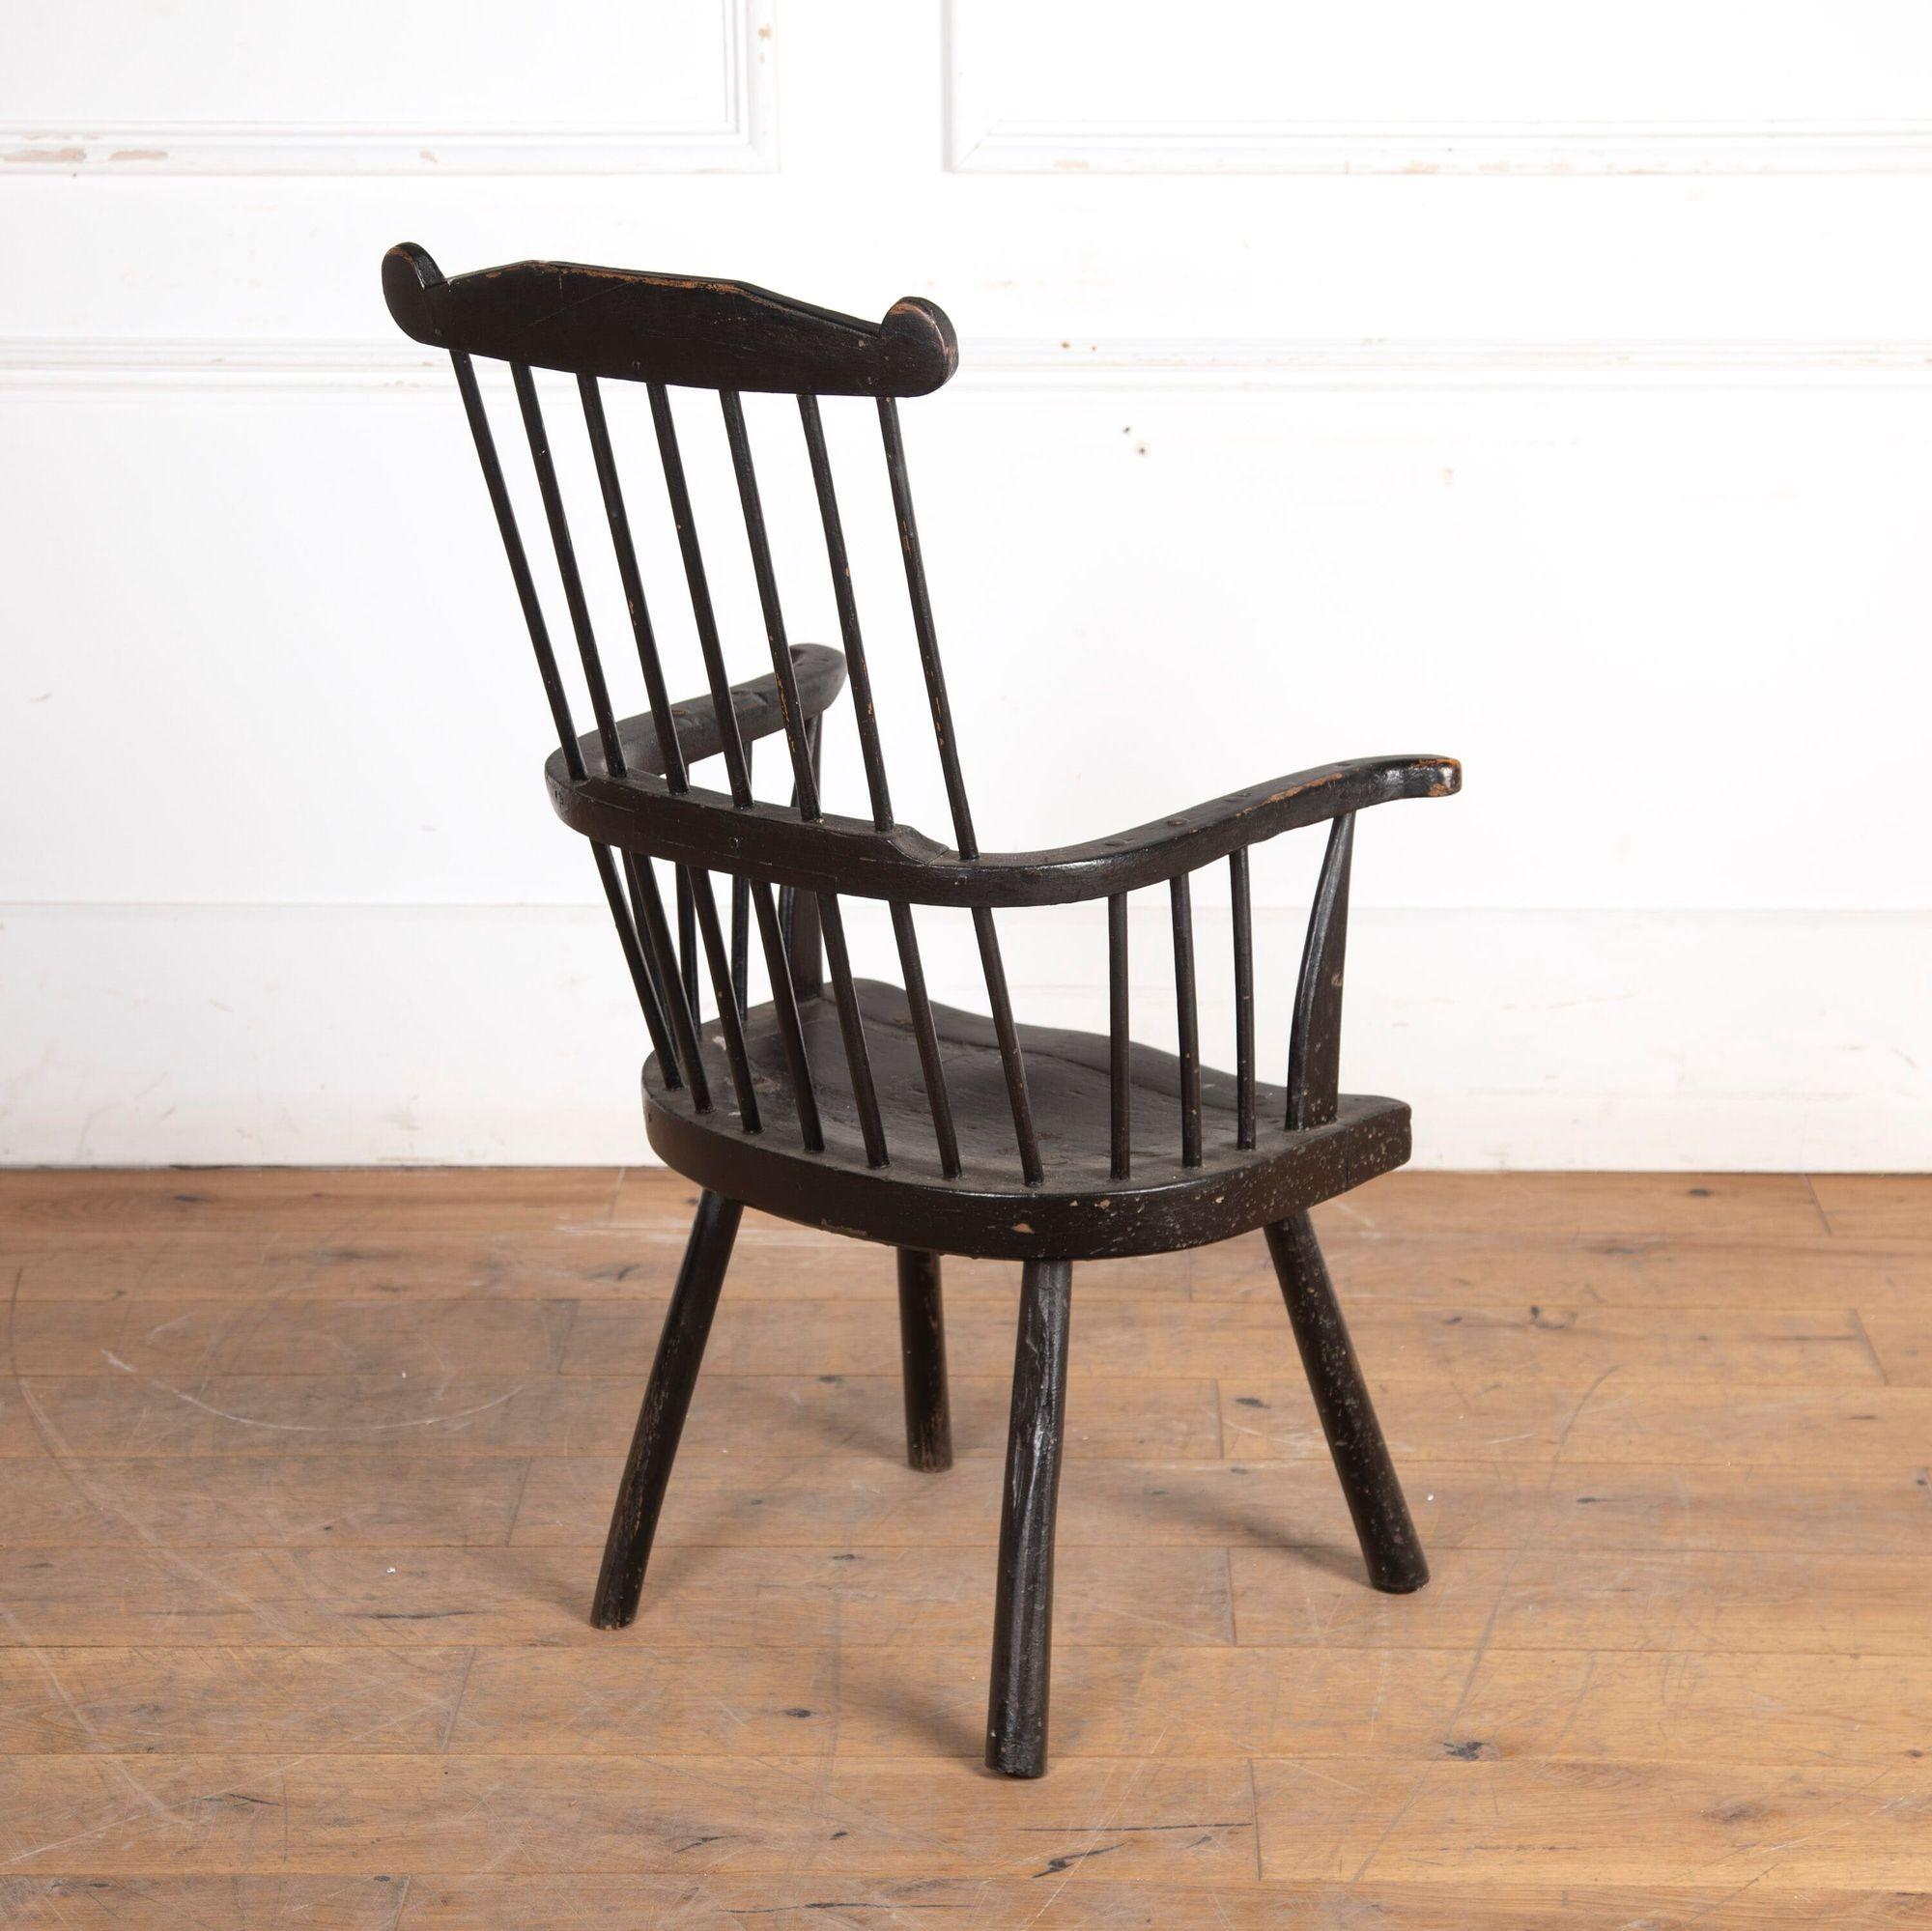 Late 18th Century Welsh Comb-Back Stick Chair 2